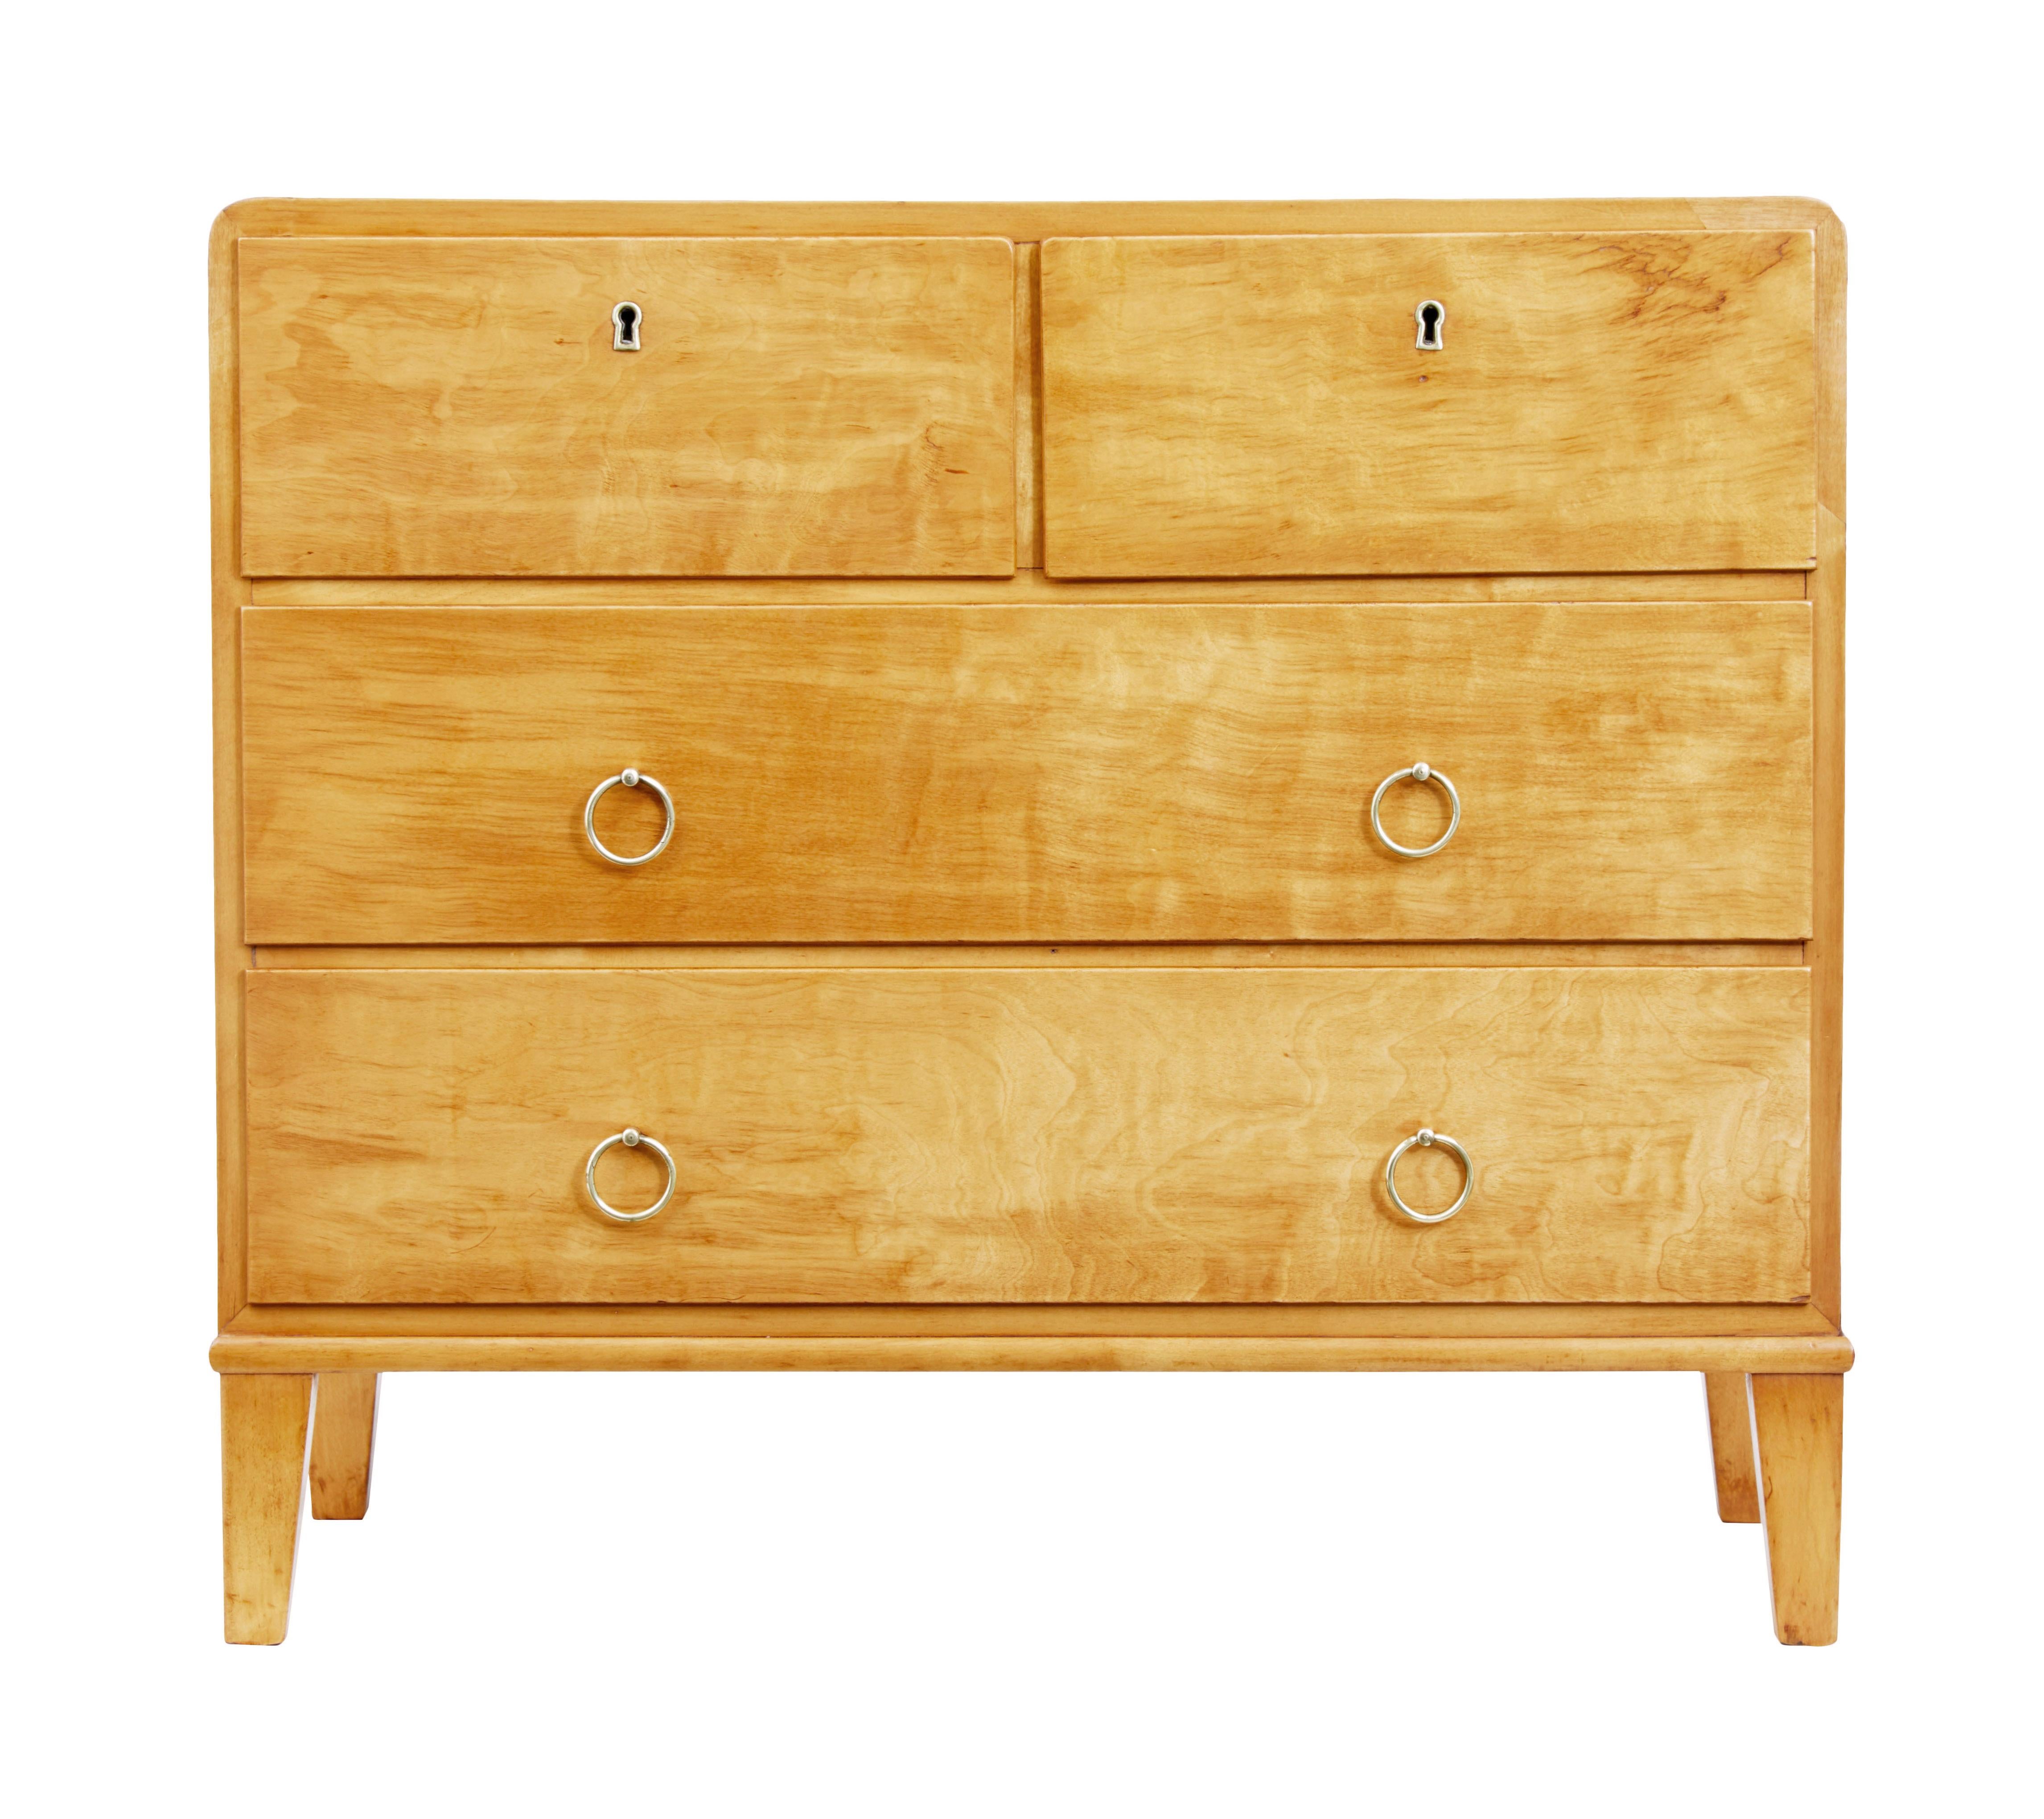 Mid 20th century Scandinavian birch chest of drawers circa 1950.

Stylish chest of drawers of small proportions, rounded top edges in the art deco taste, 2 short drawers over 2 long.  Top 2 drawers open on the key, bottom drawers with brass ring